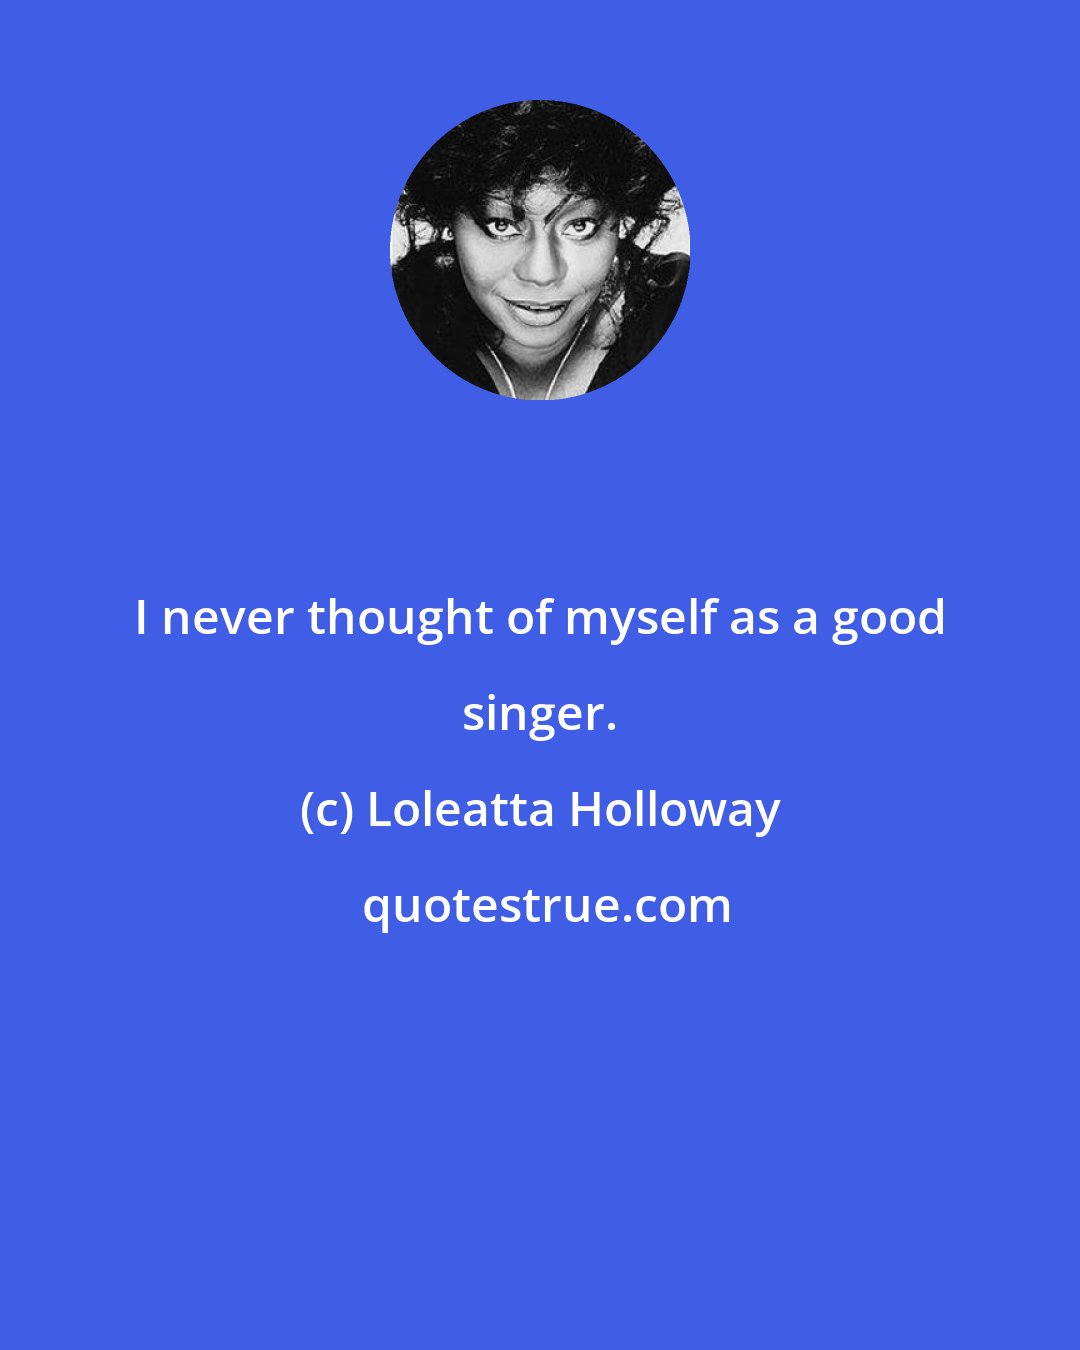 Loleatta Holloway: I never thought of myself as a good singer.